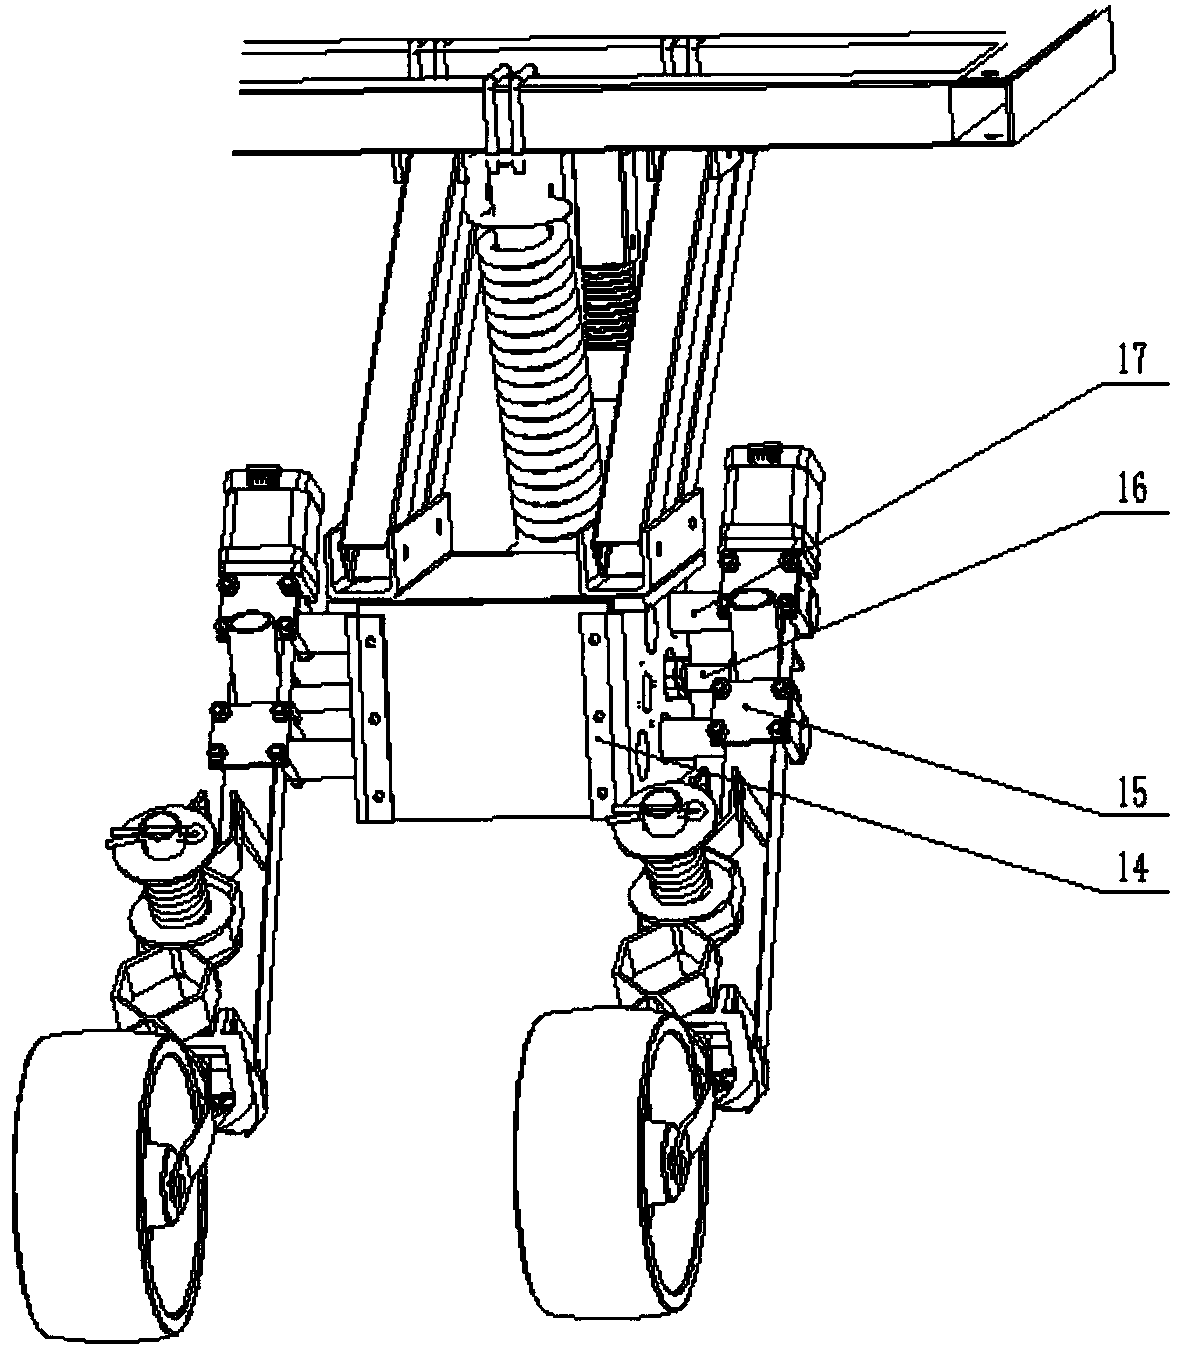 A rate-variable fertilizing machine used for corn and achieving self-adaptive line spacing